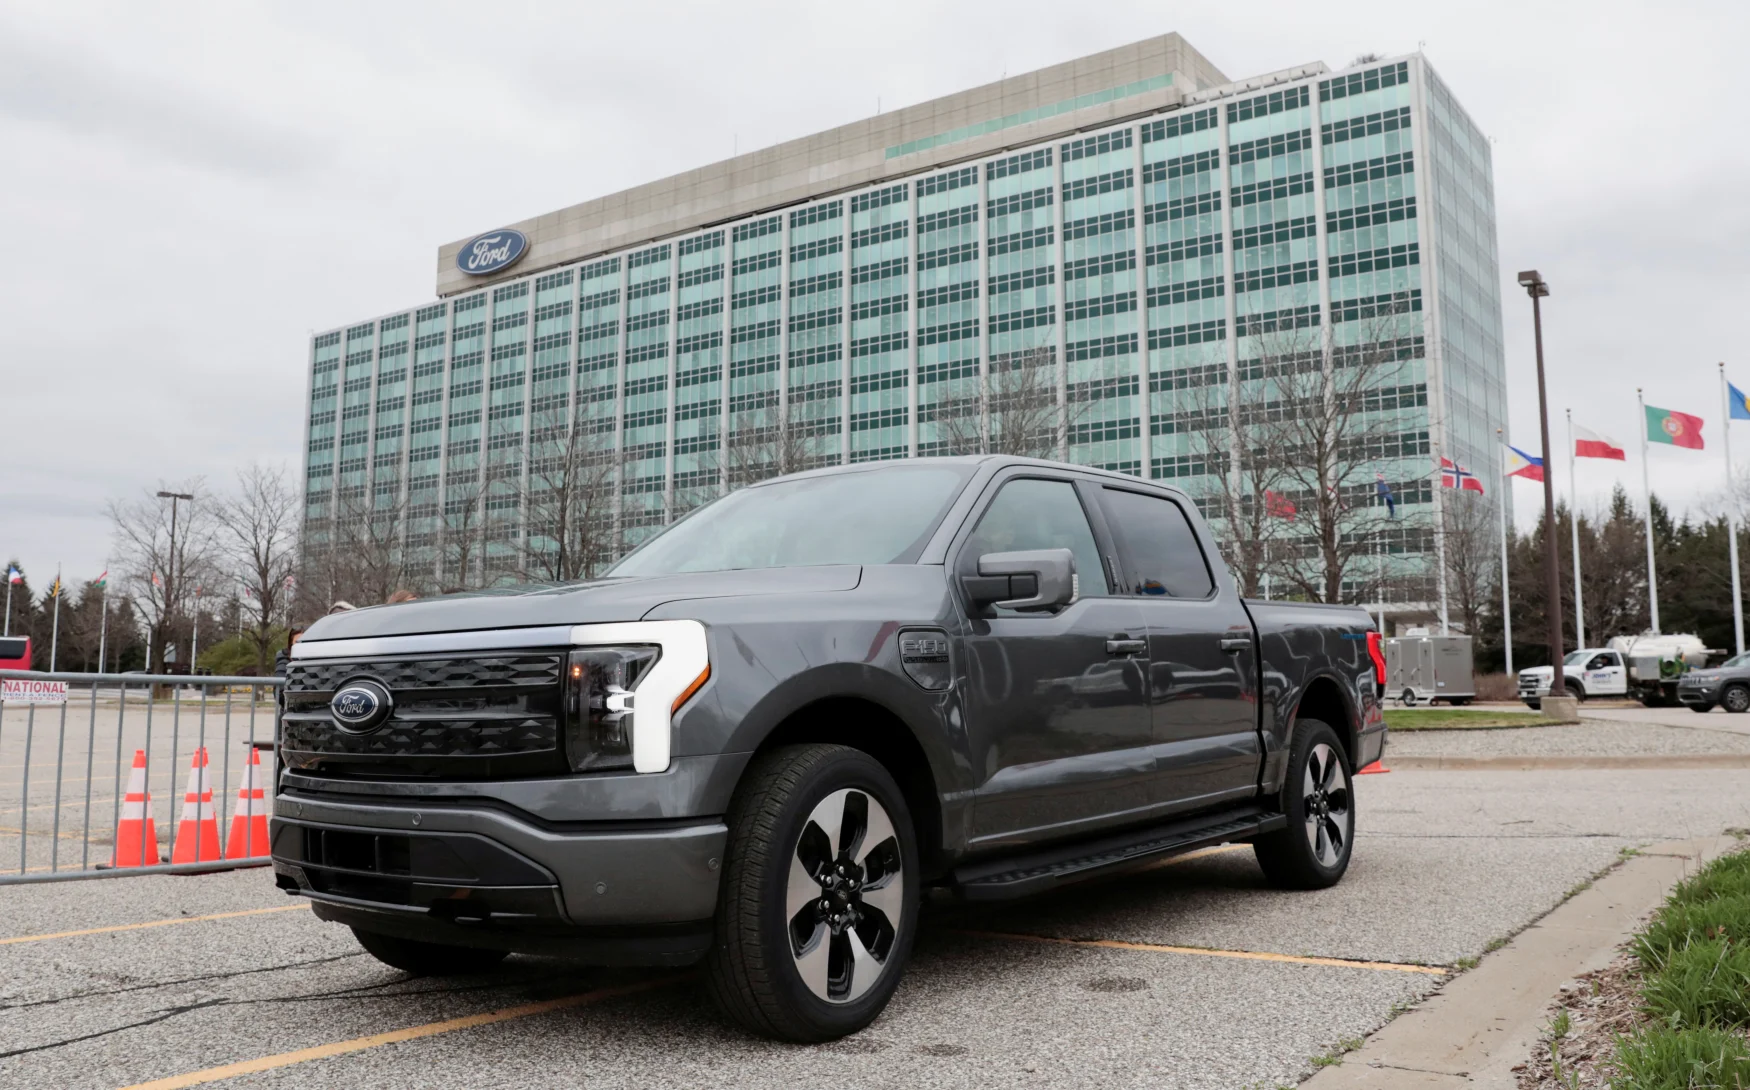 A model of the all-new Ford F-150 Lightning electric pickup is parked in front of the Ford Motor Company World Headquarters in Dearborn, Michigan, U.S. April 26, 2022. REUTERS/Rebecca Cook